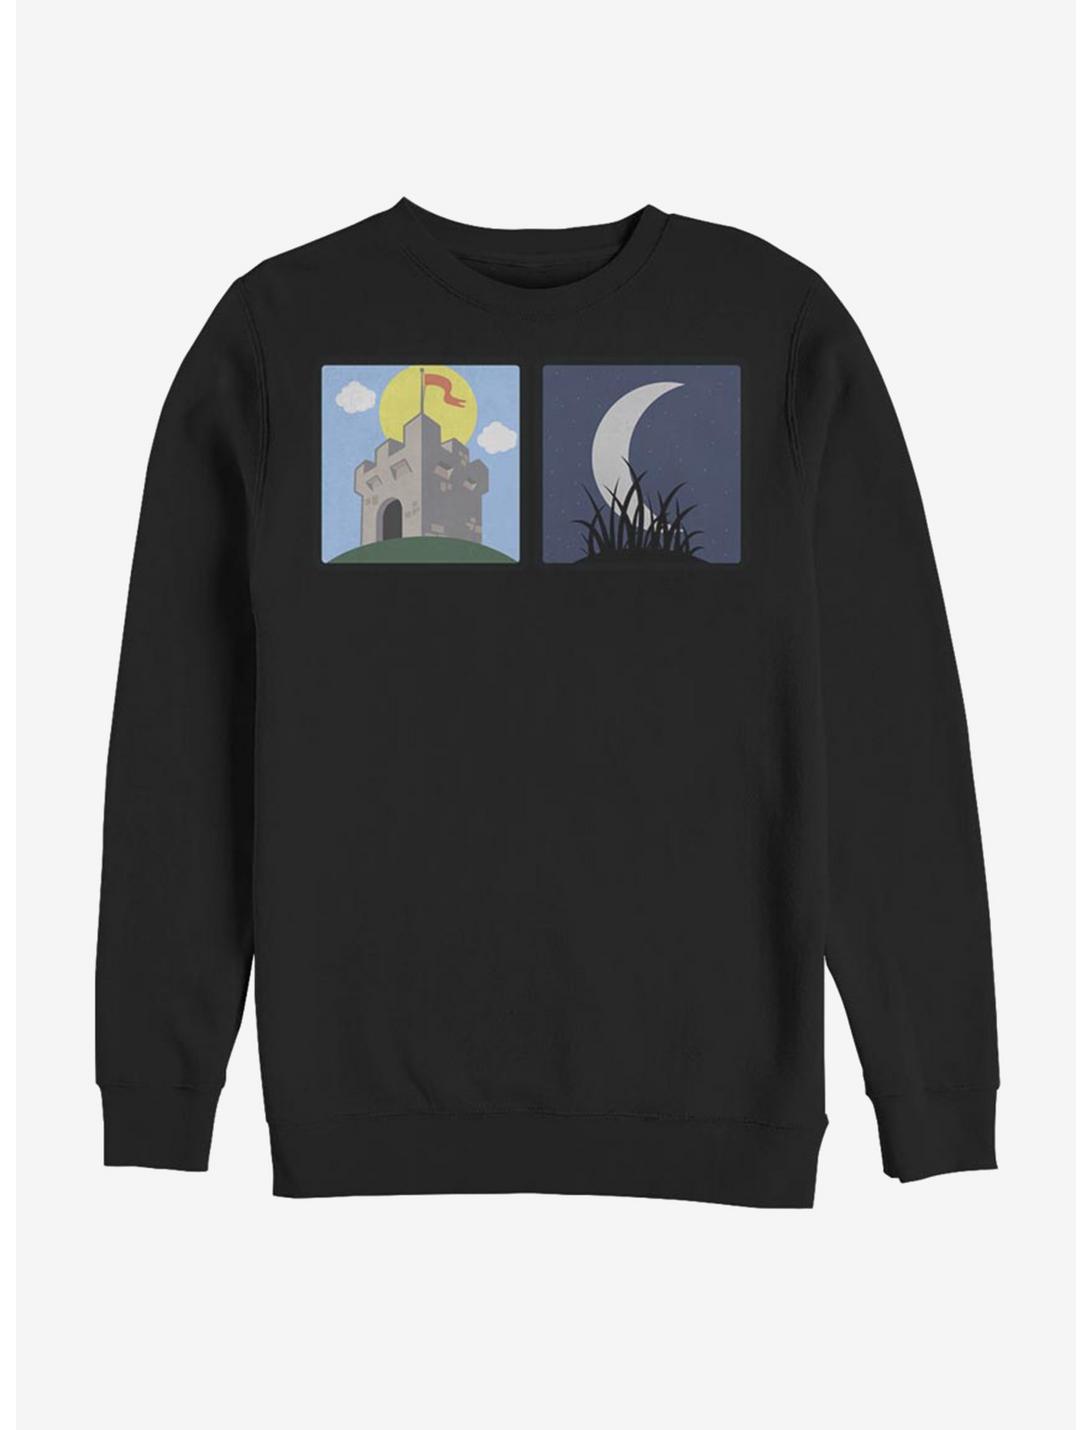 Fortress And Night Time Sweatshirt, BLACK, hi-res